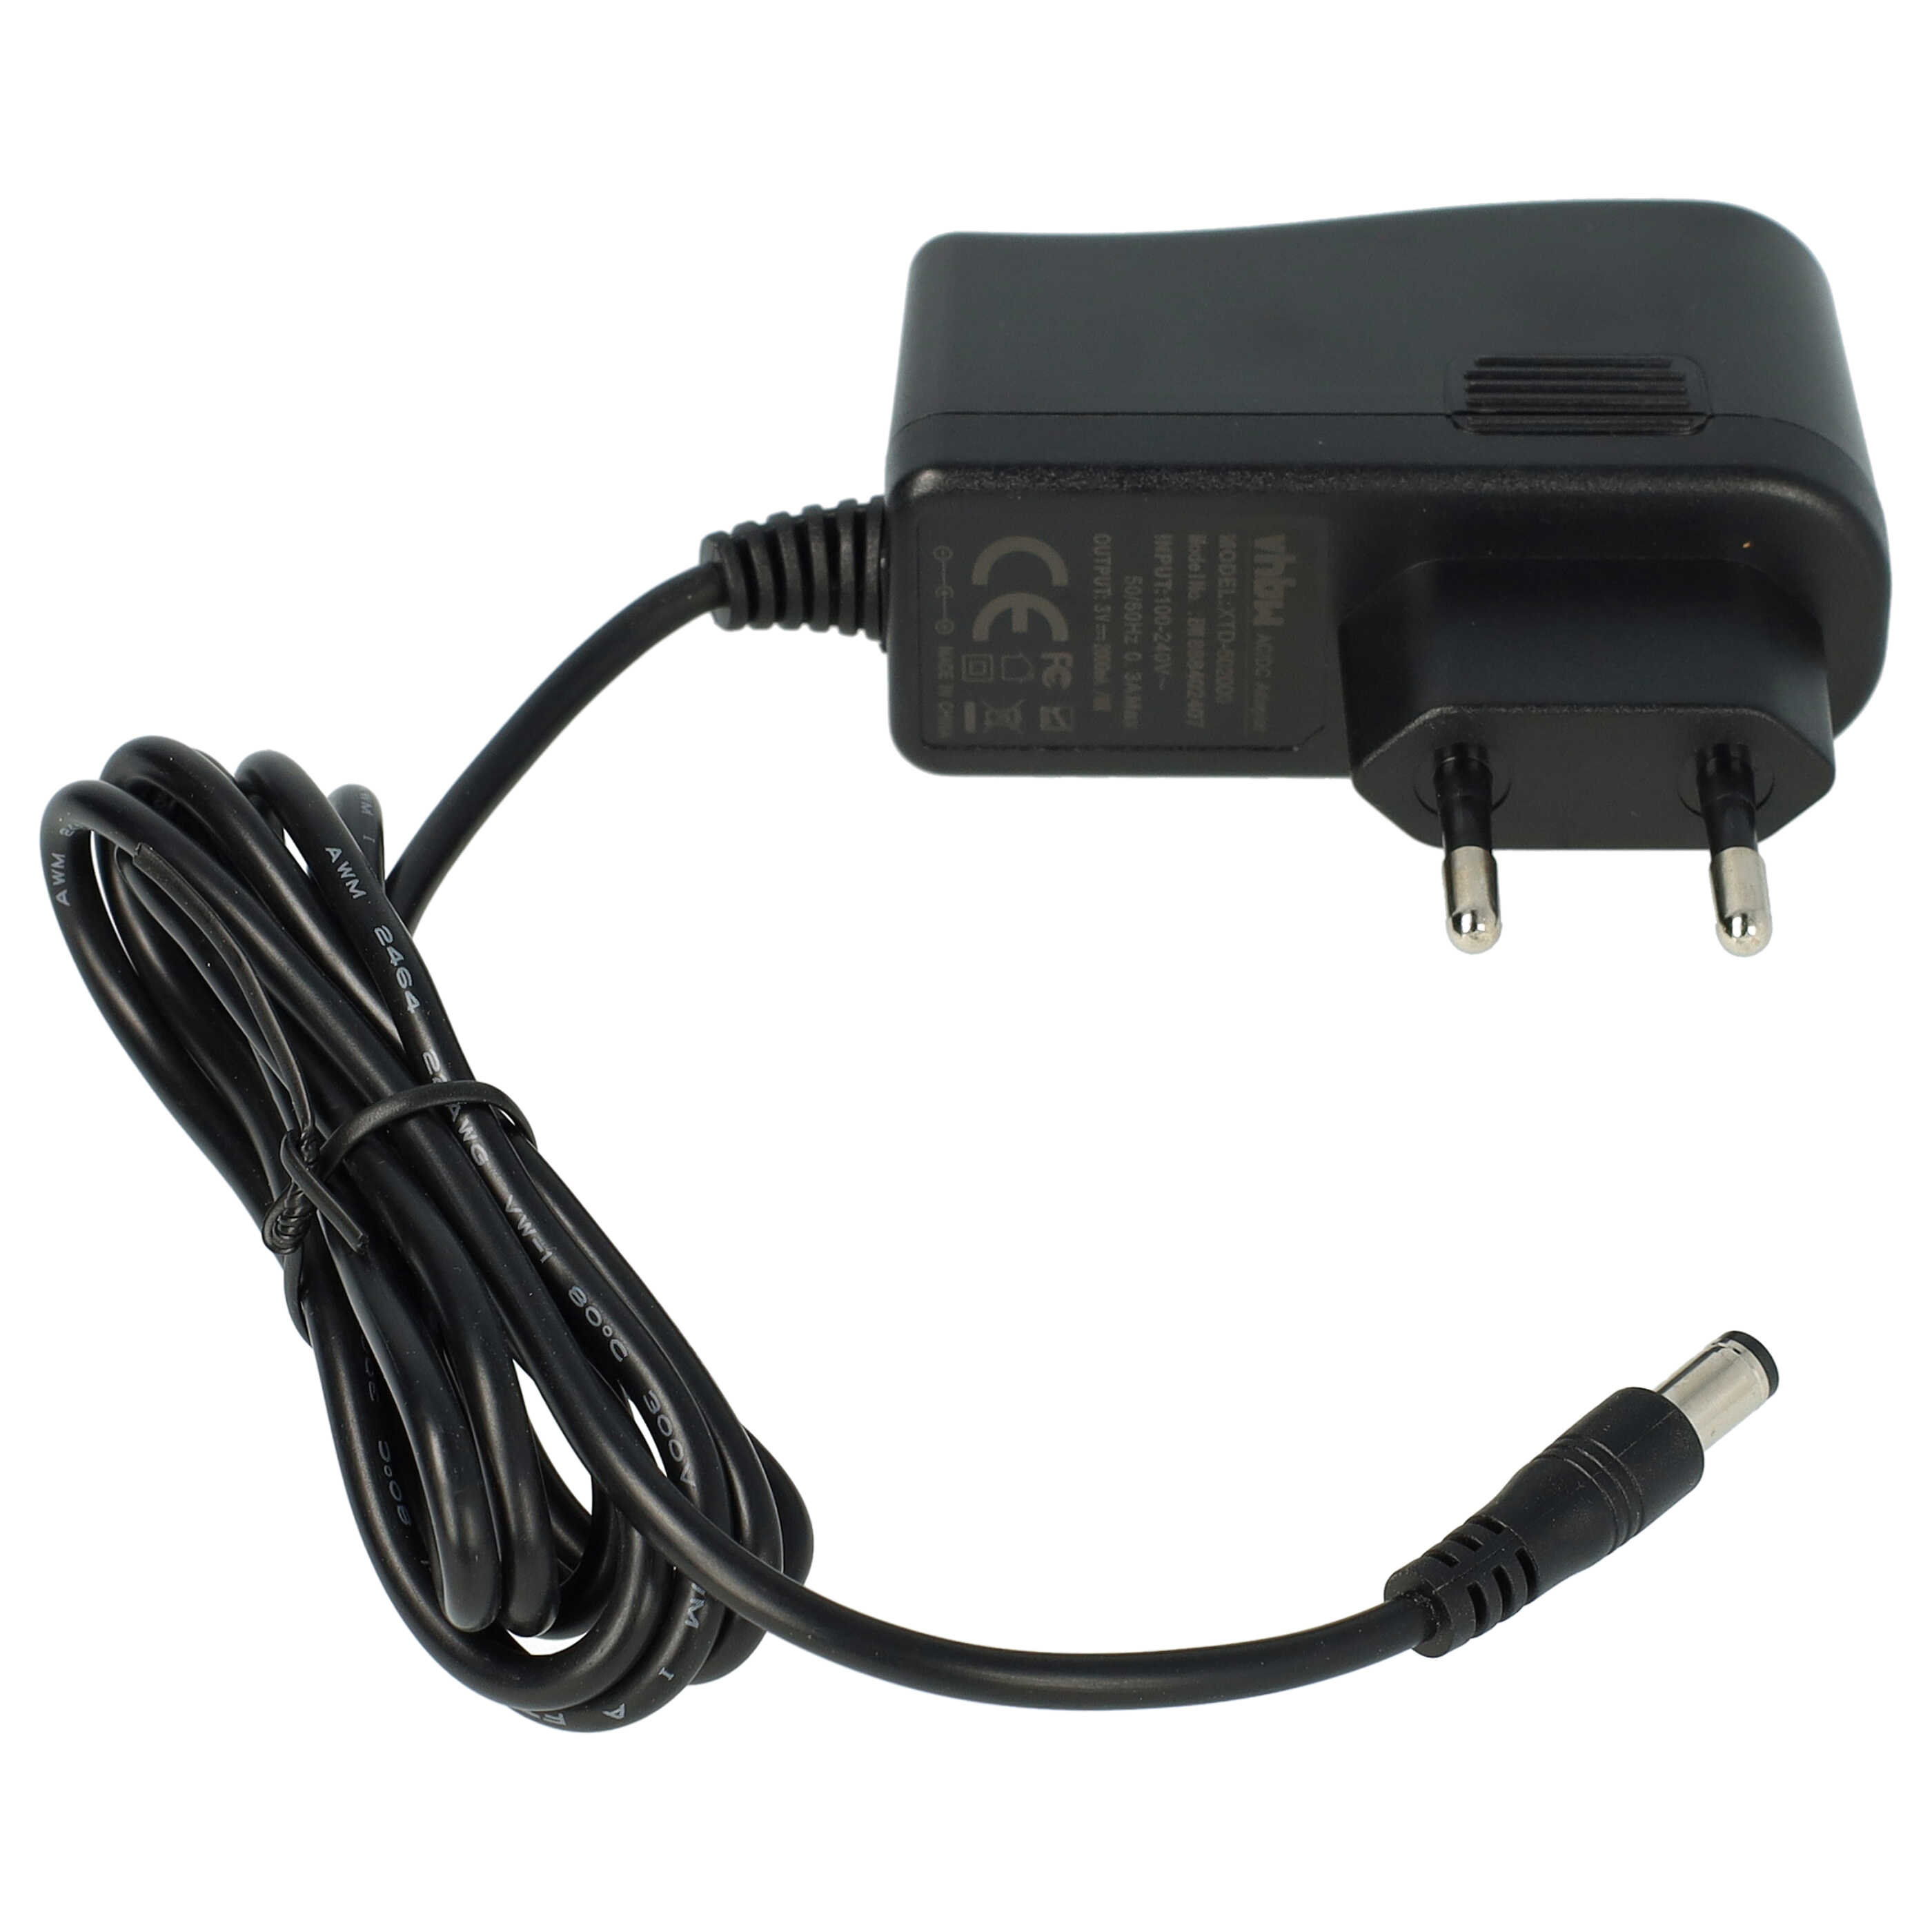 Mains Power Adapter with 5.5 x 2.1 mm Plug suitable for various Electric Devices - 3 V, 2 A